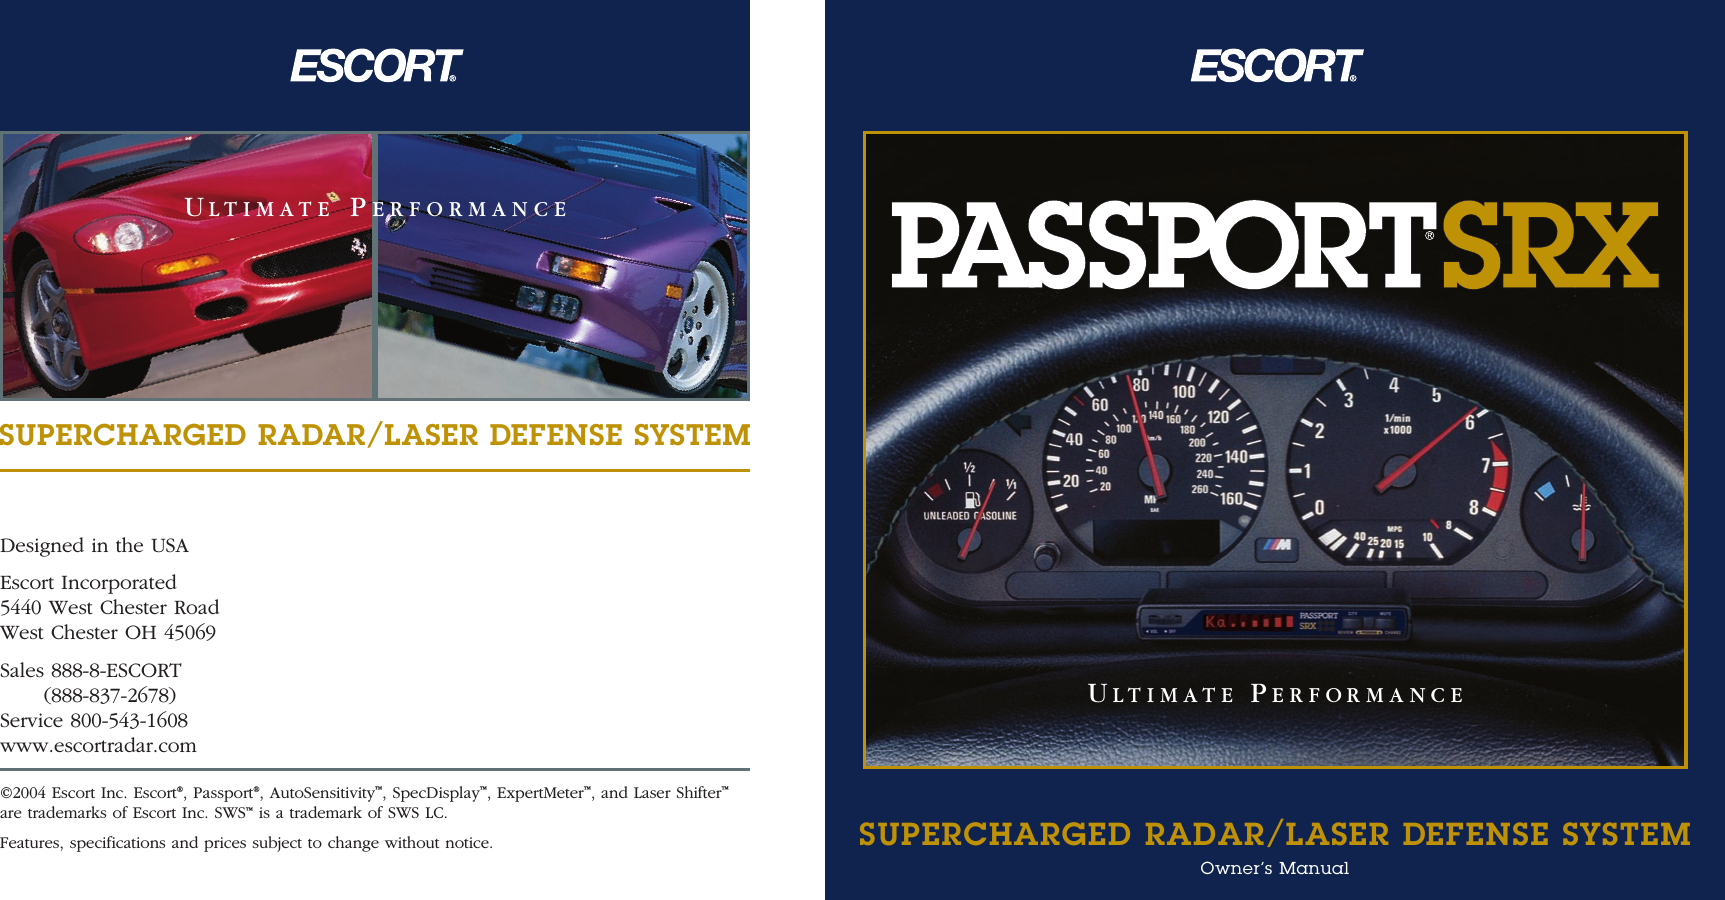 Designed in the USAEscort Incorporated5440 West Chester RoadWest Chester OH 45069Sales 888-8-ESCORT(888-837-2678)Service 800-543-1608www.escortradar.com©2004 Escort Inc. Escort®, Passport®, AutoSensitivity™, SpecDisplay™, ExpertMeter™, and Laser Shifter™are trademarks of Escort Inc. SWS™is a trademark of SWS LC. Features, specifications and prices subject to change without notice.SUPERCHARGED RADAR/LASER DEFENSE SYSTEMSUPERCHARGED RADAR/LASER DEFENSE SYSTEMOwner’s ManualULTIMATE PERFORMANCEULTIMATE PERFORMANCE